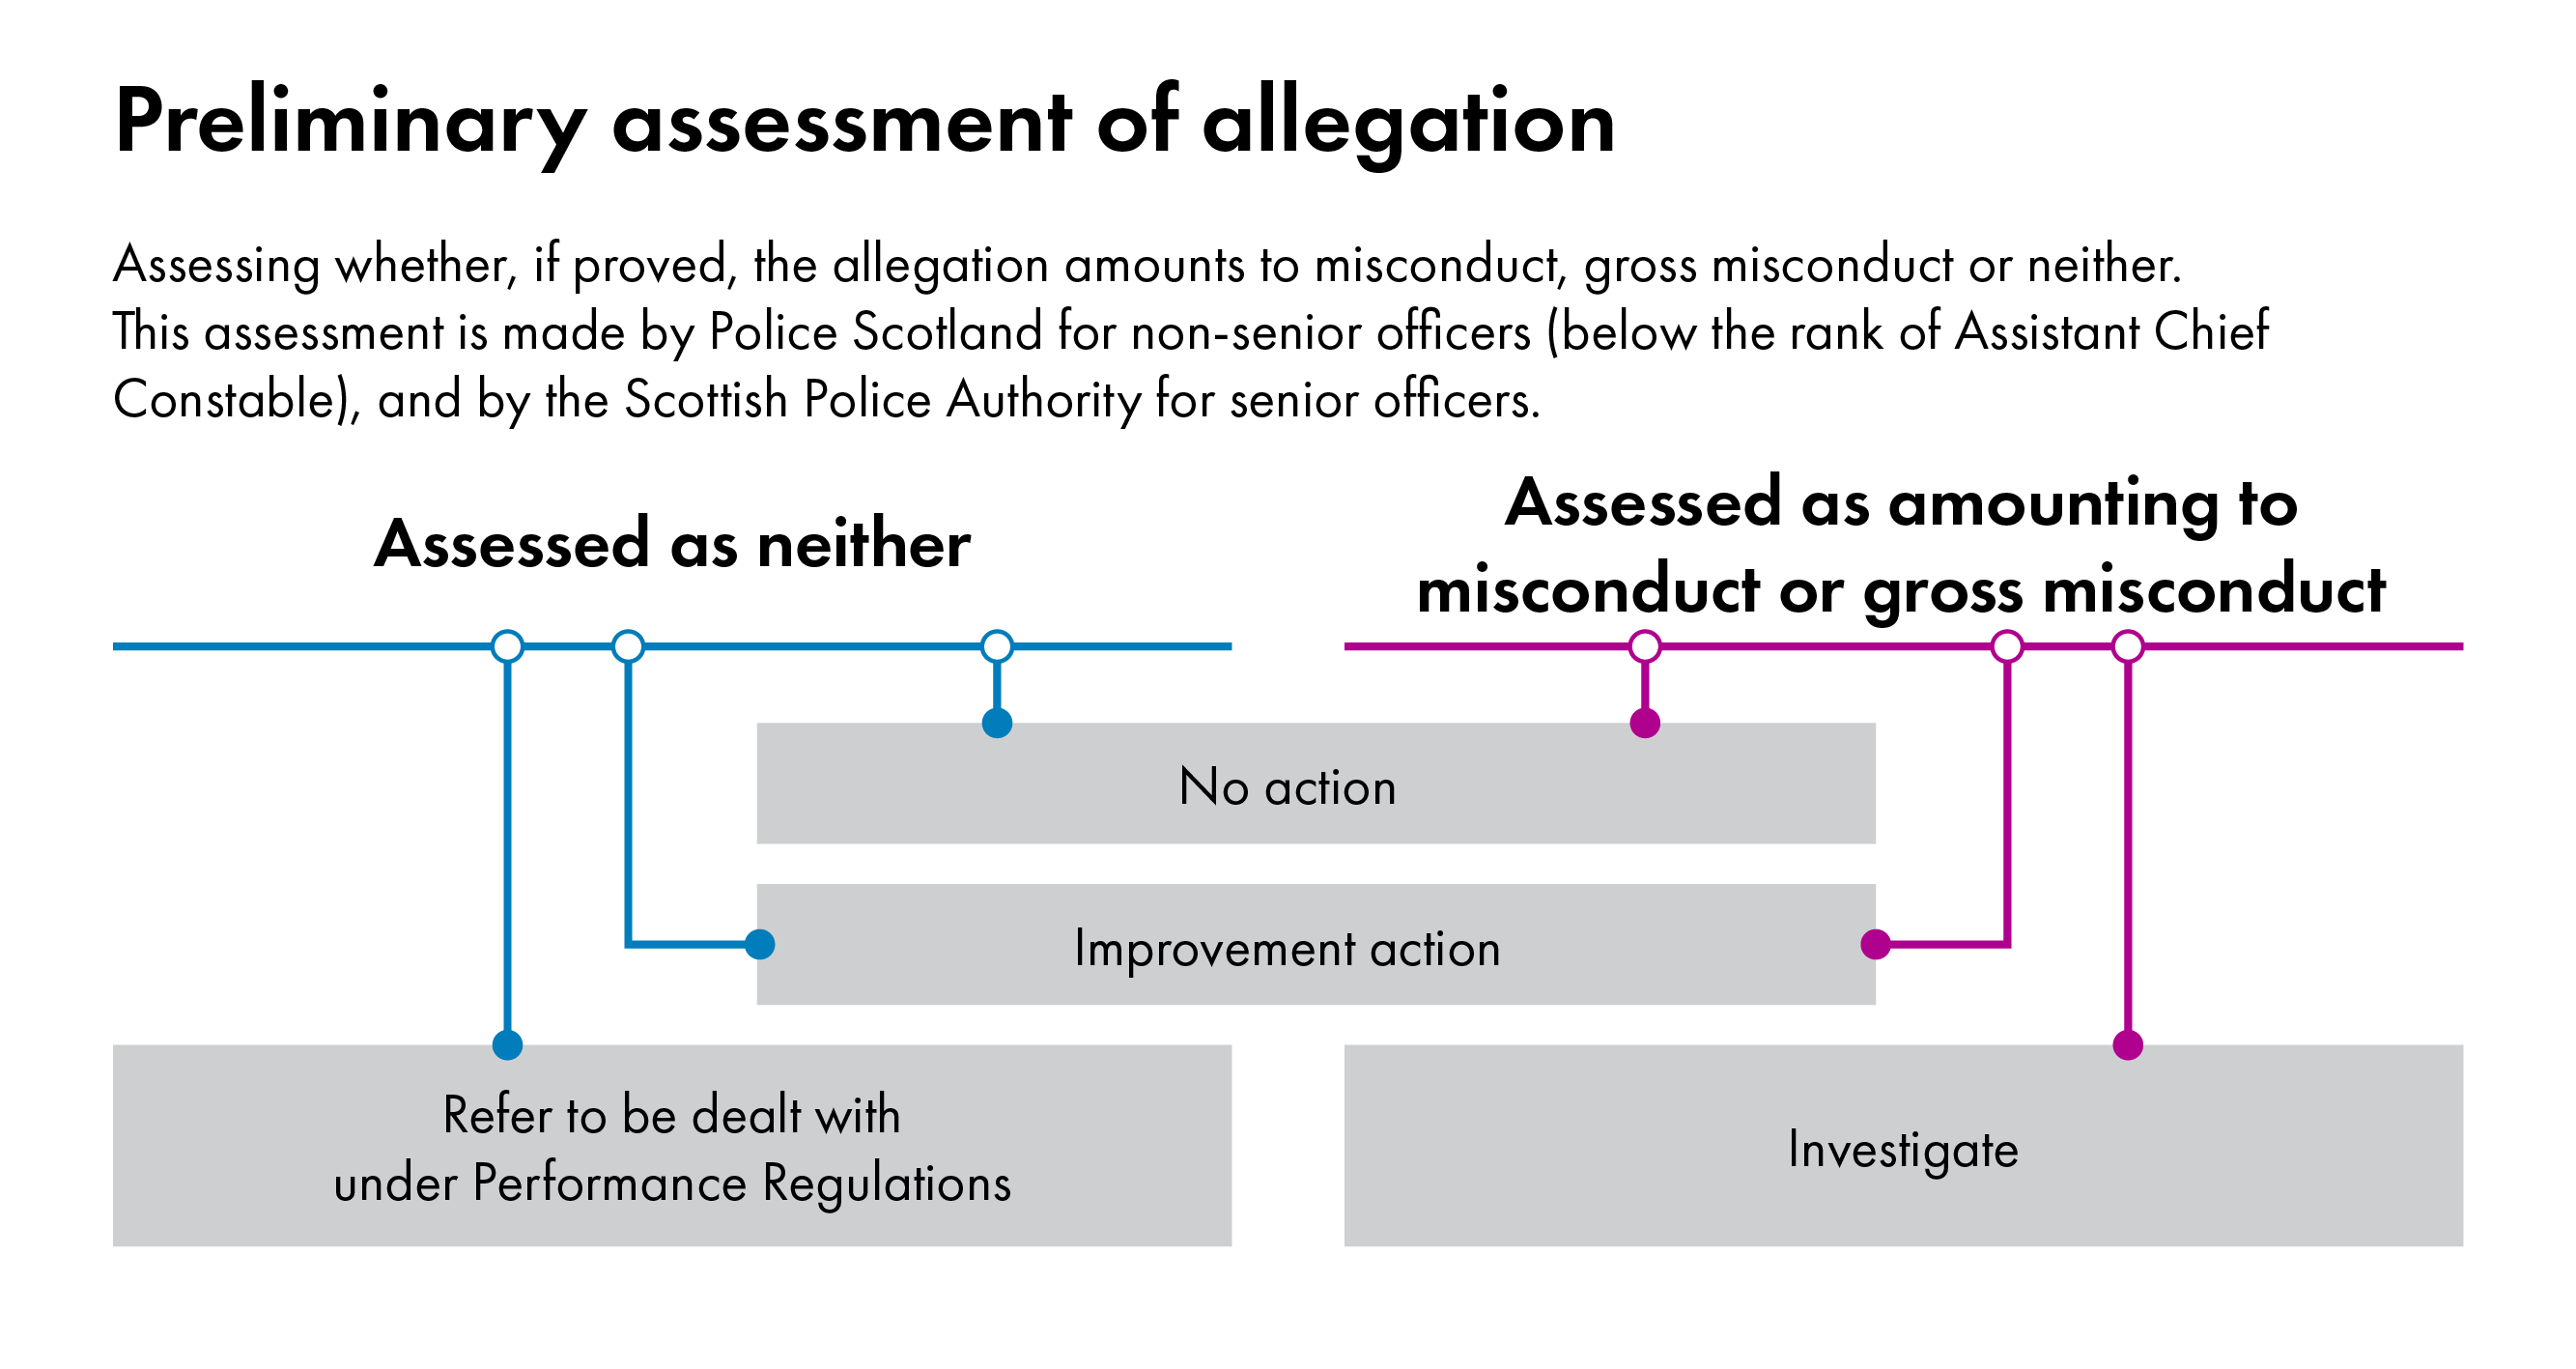 The image shows the preliminary assessment process for police misconduct allegations.